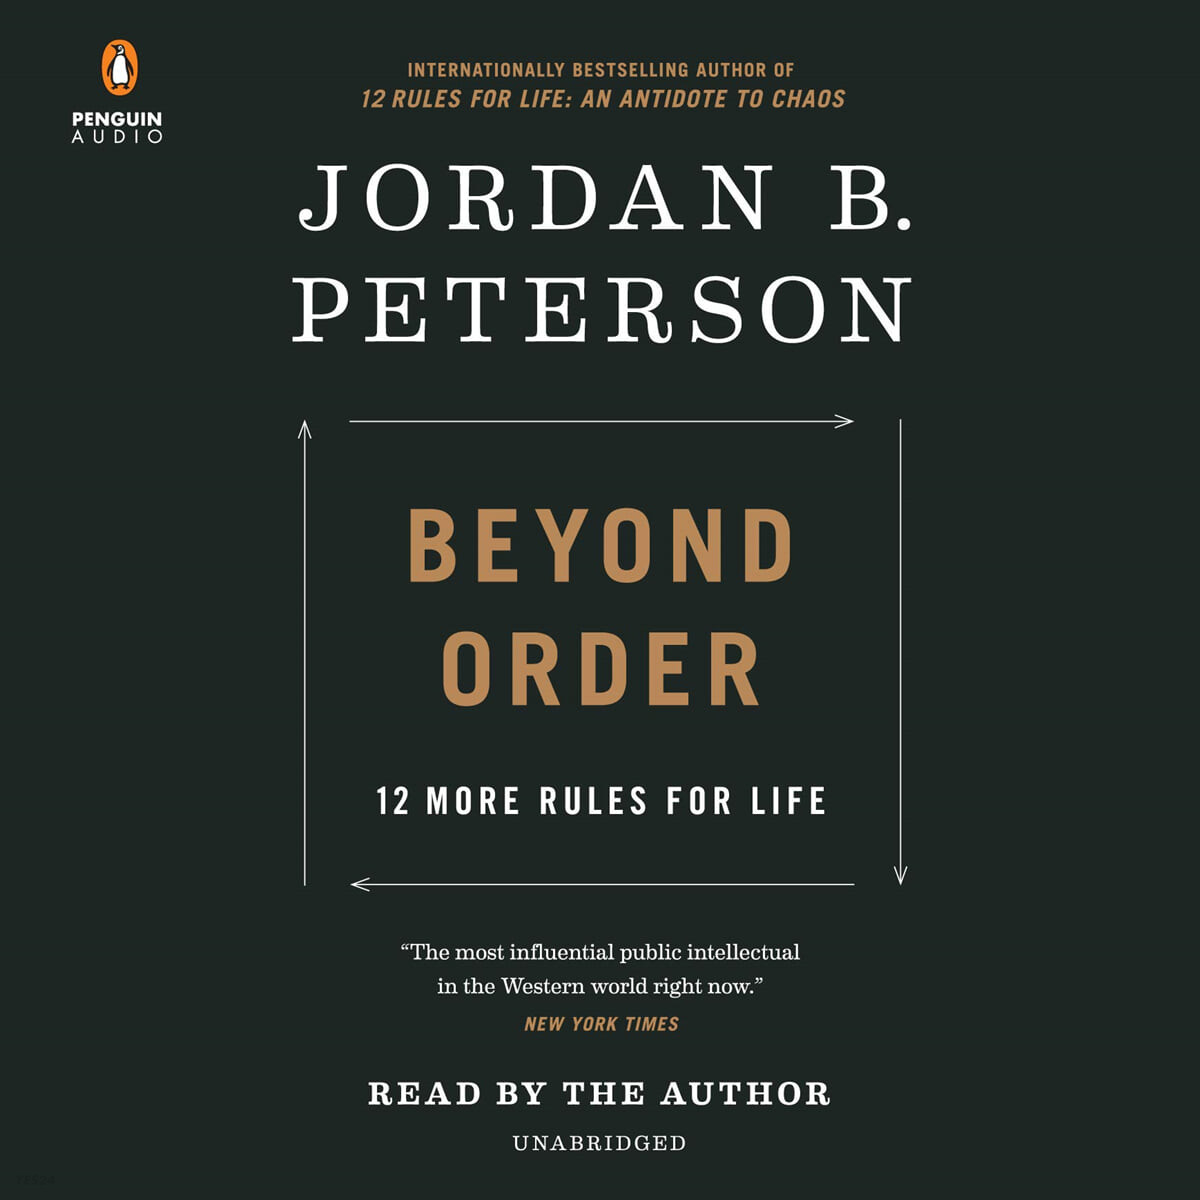 Beyond Order: 12 More Rules for Life (12 More Rules for Life)